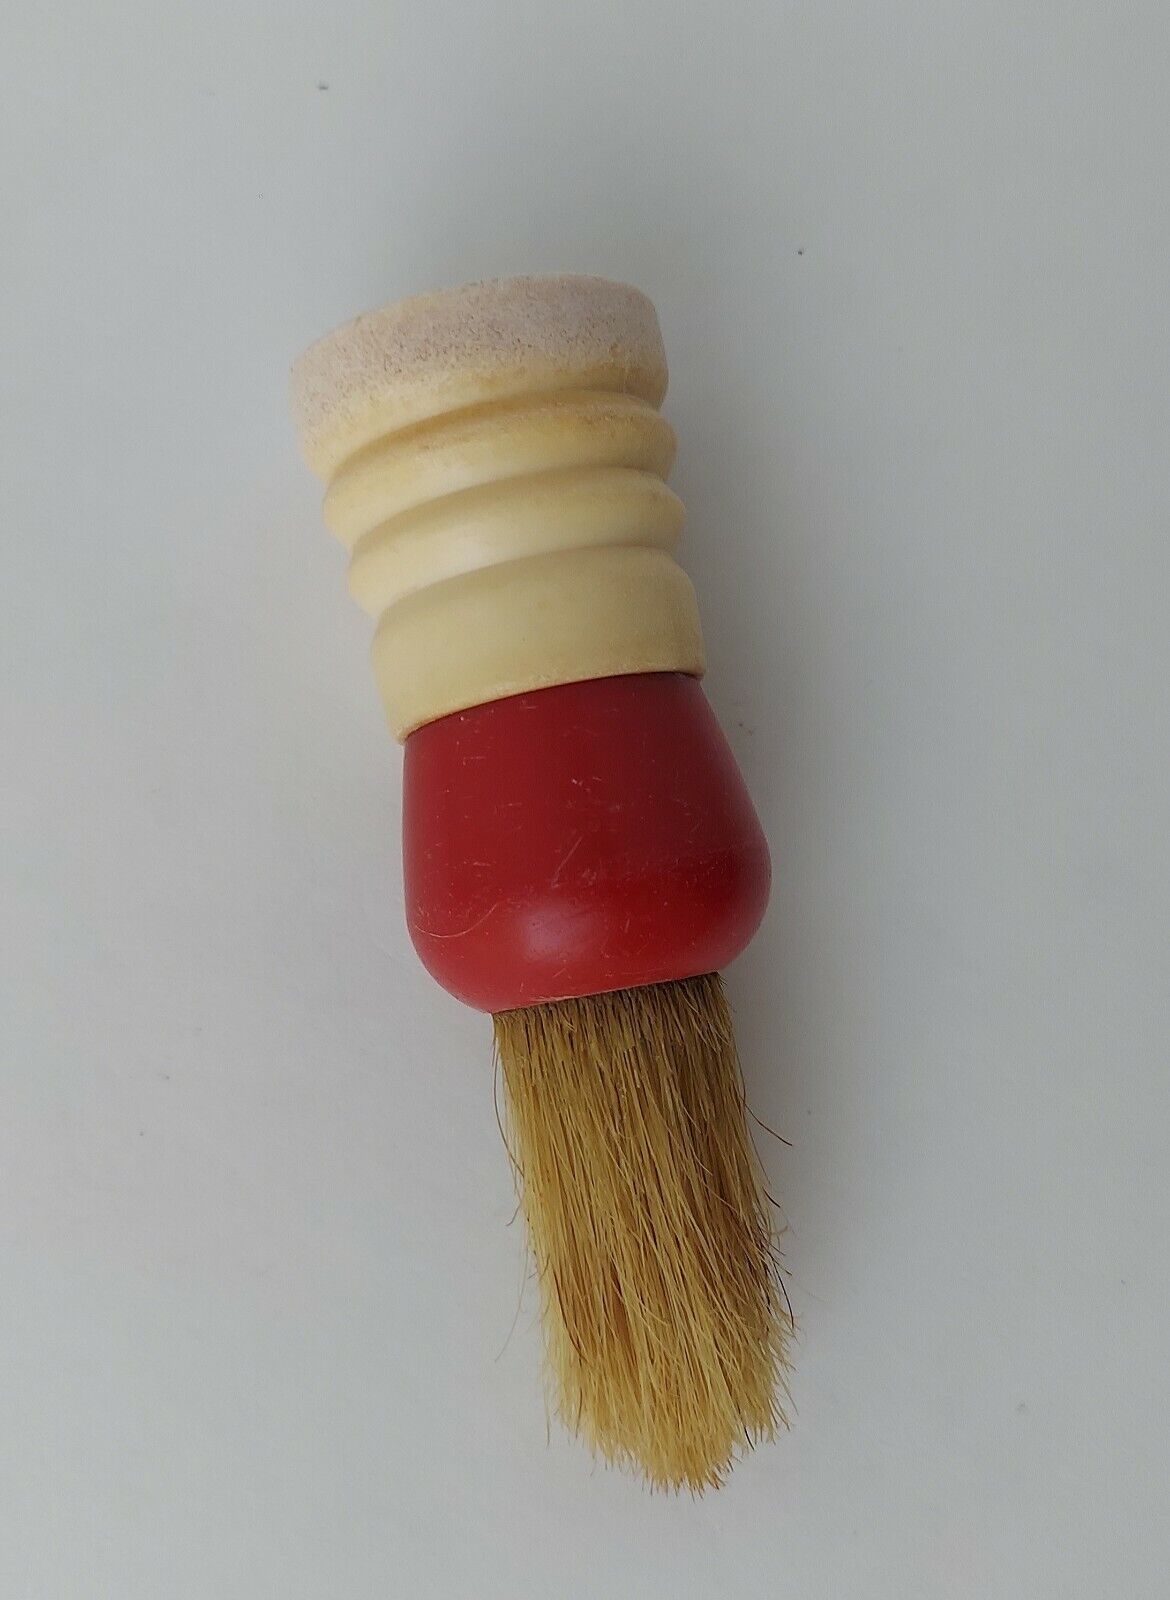 Vintage Early Century Ever-Ready Shaving Brush No. 100 STERILIZED MADE IN U.S.A 